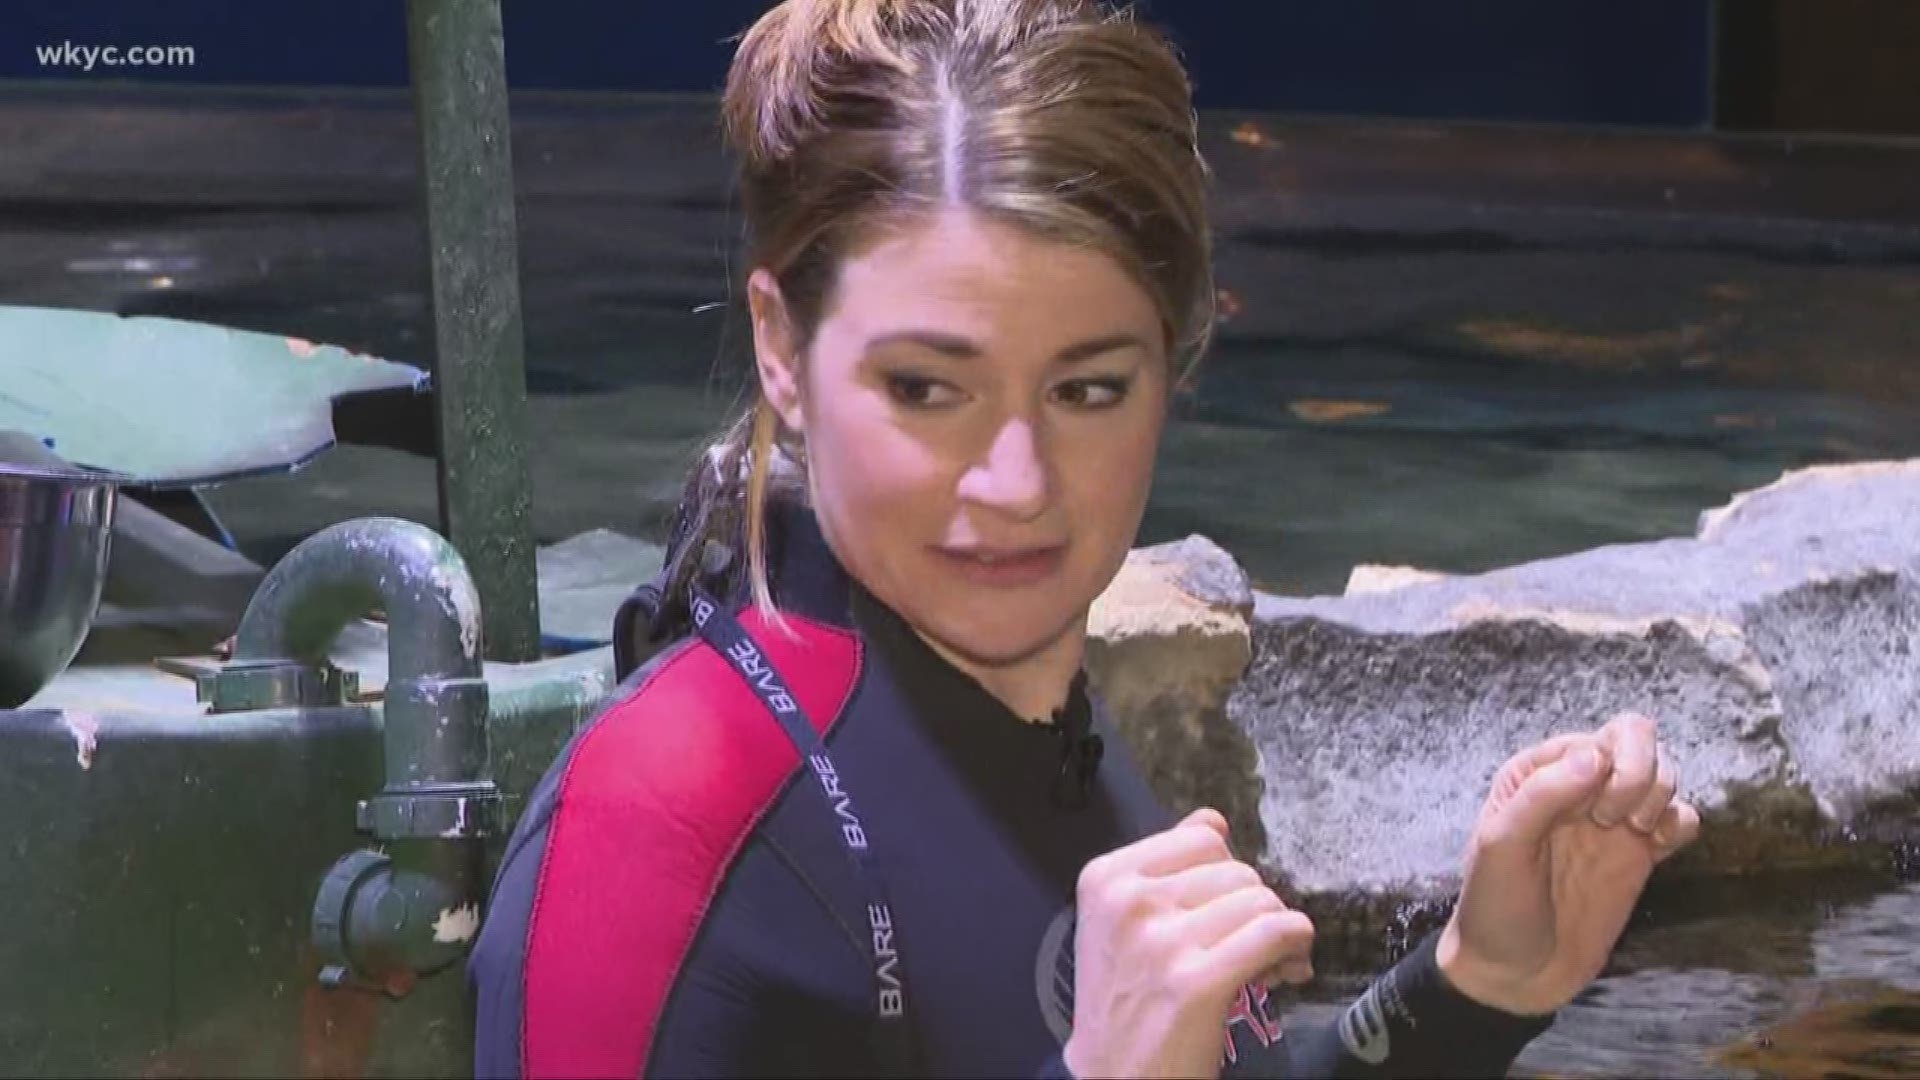 Feb. 4, 2019: What are you scared of? Our own Maureen Kyle has a fear of stingrays. So, for 'Face Your Fears' week, we sent her to the Cleveland Aquarium where she got inside the stingray tank.